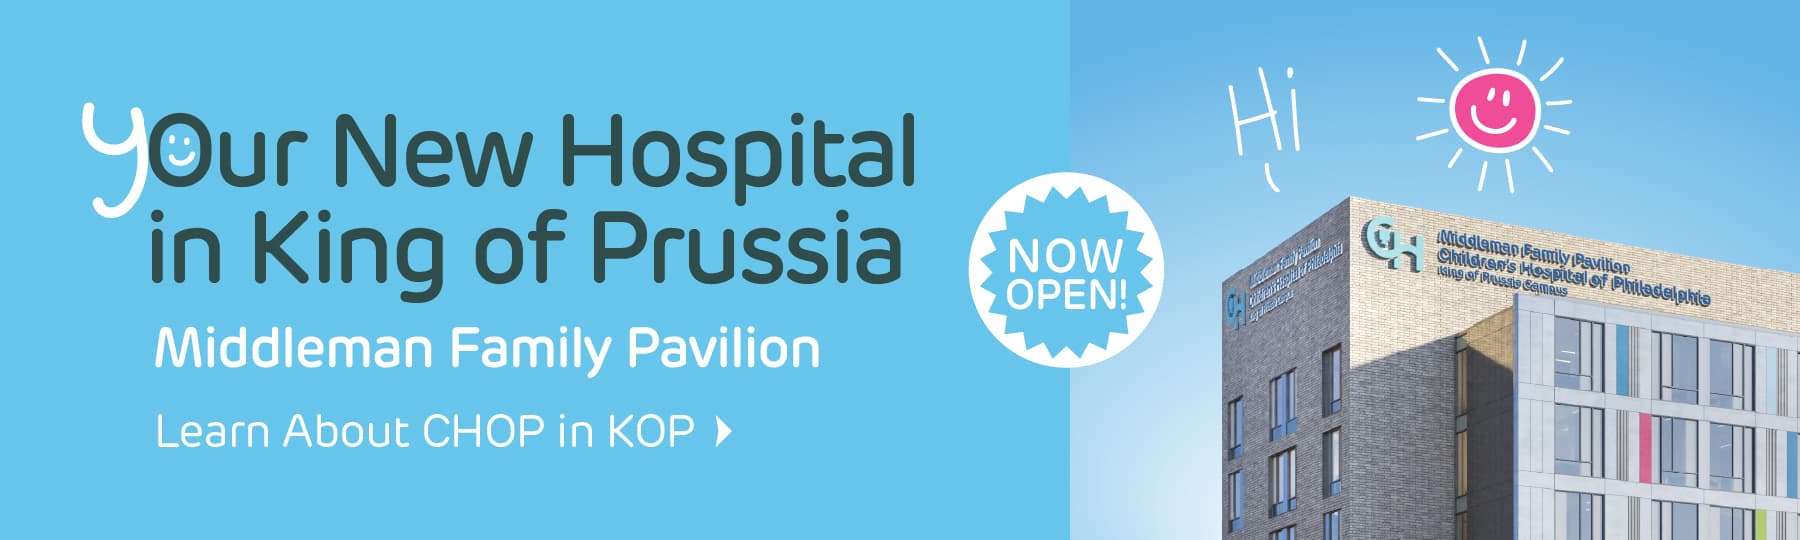 King of Prussia Hospital is Coming Soon!